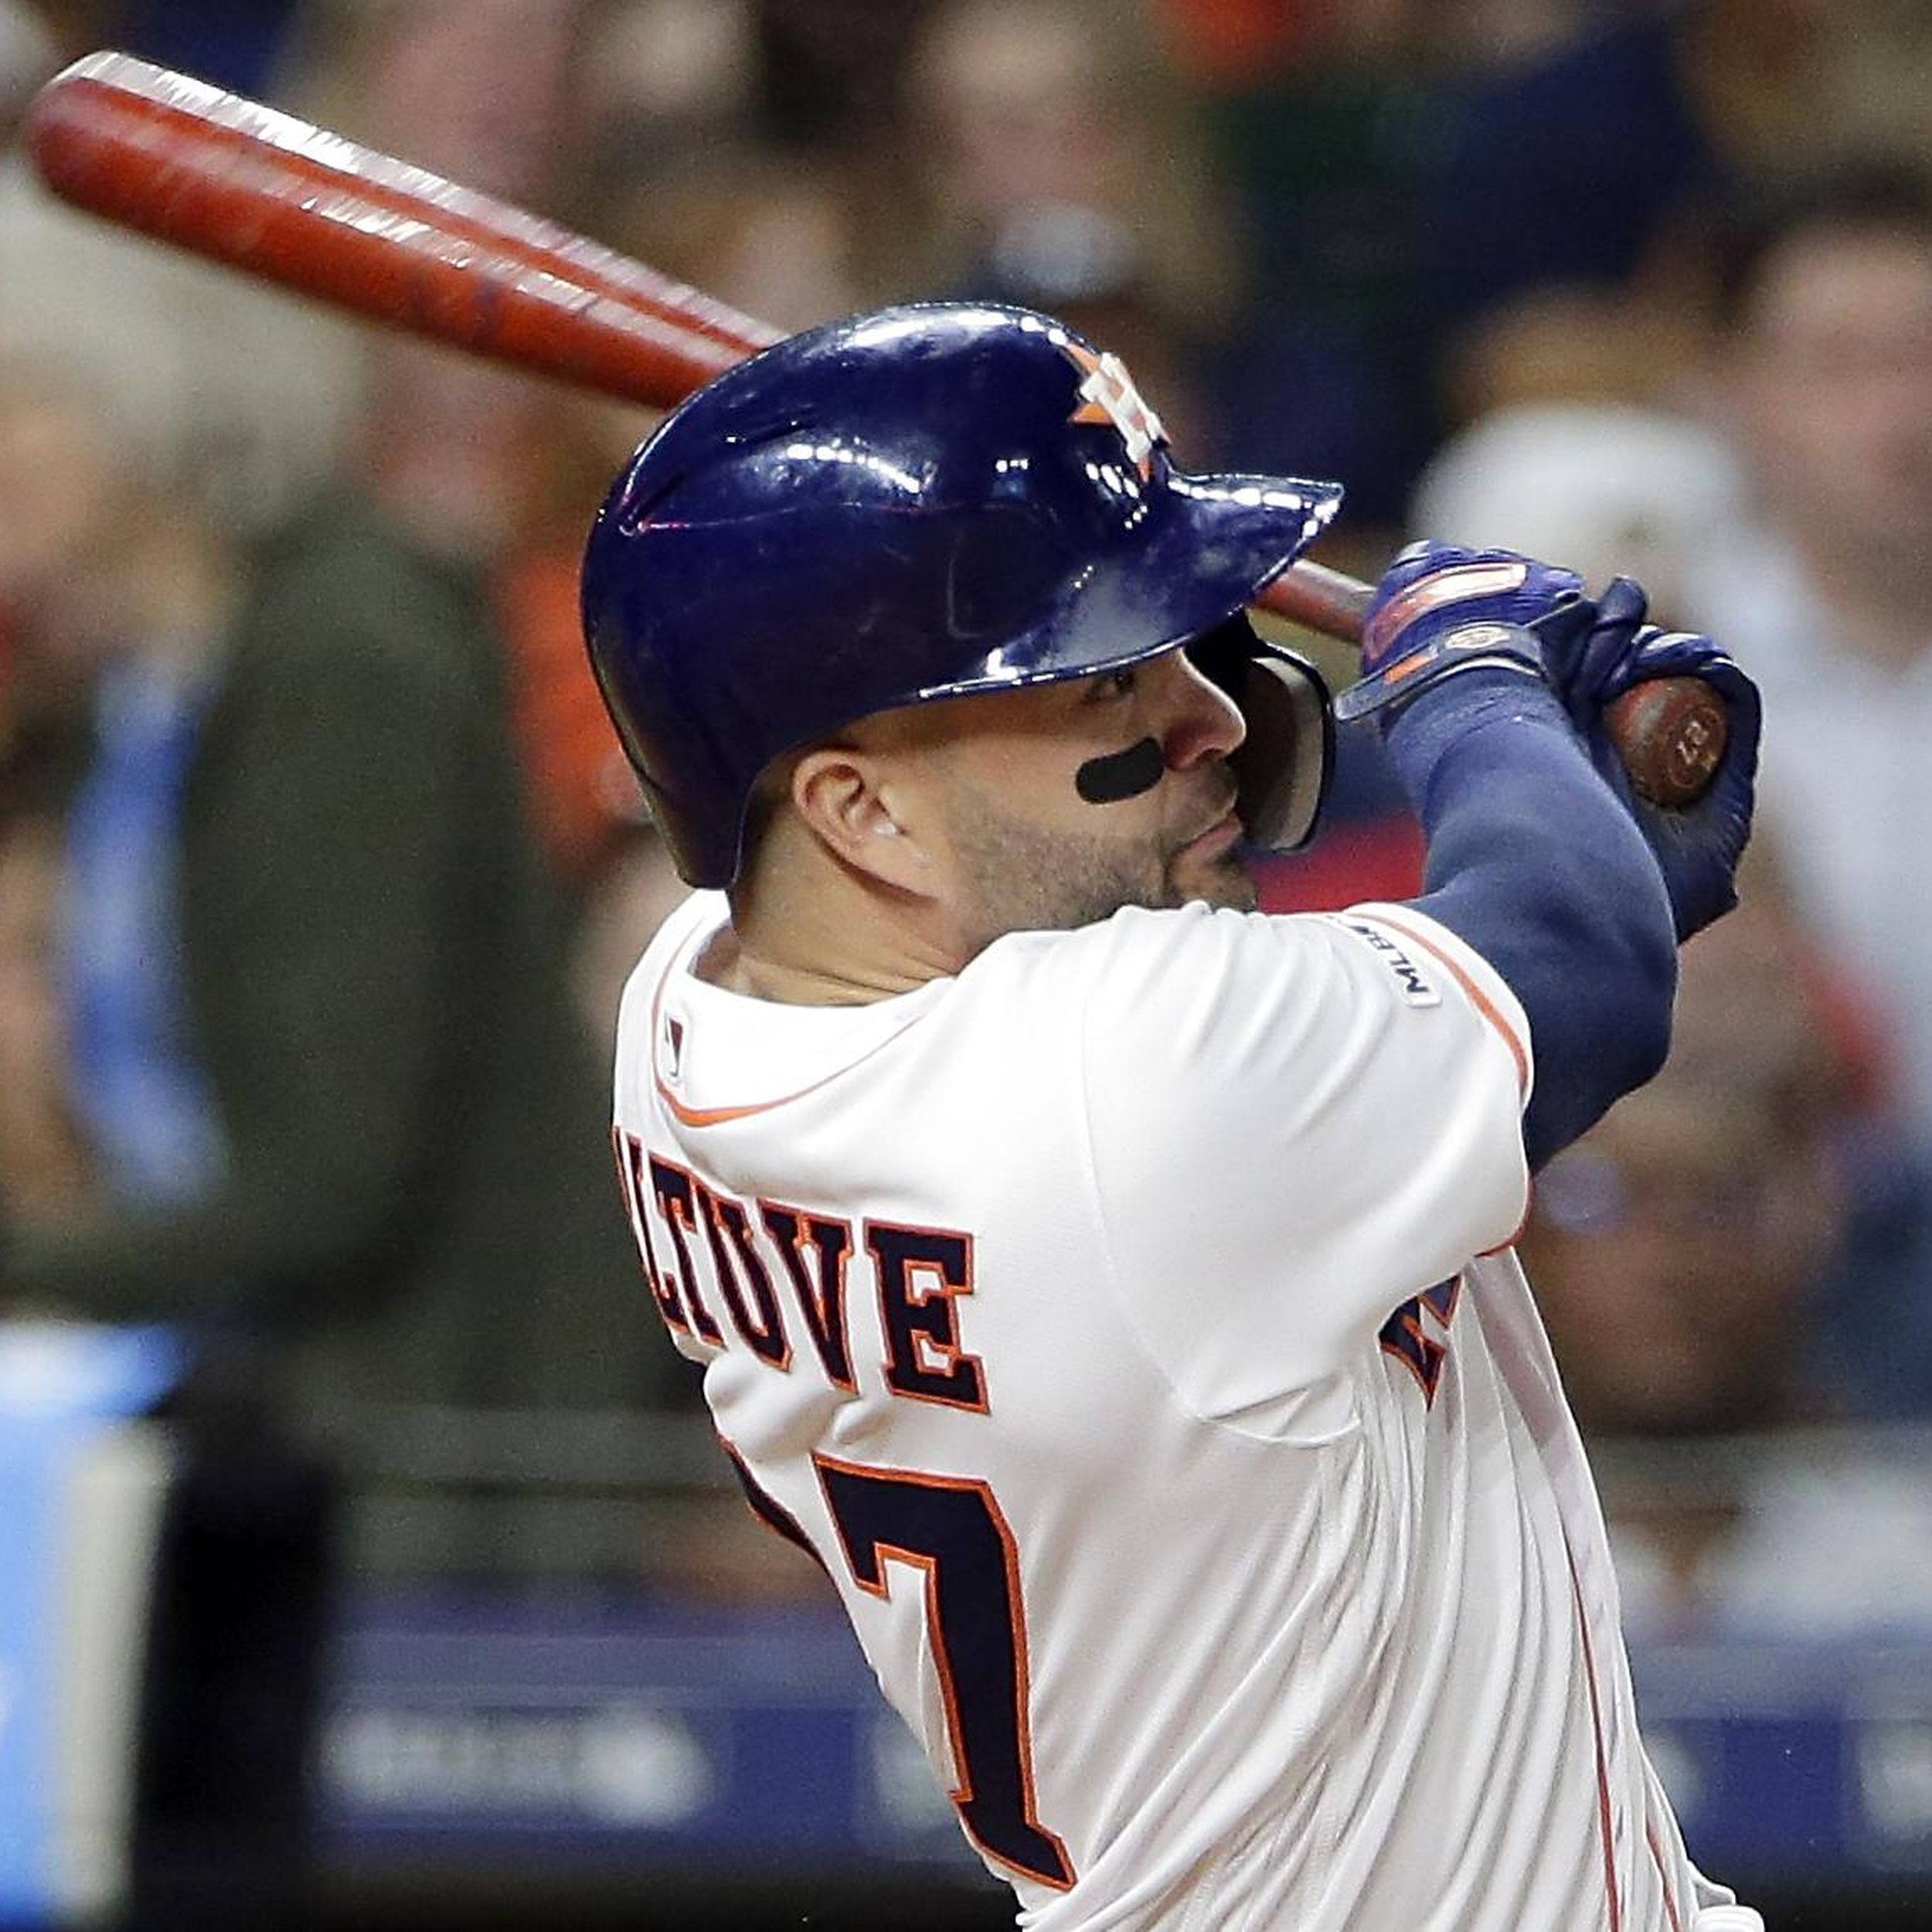 Altuve powers Astros to first-ever sweep of the Yankees